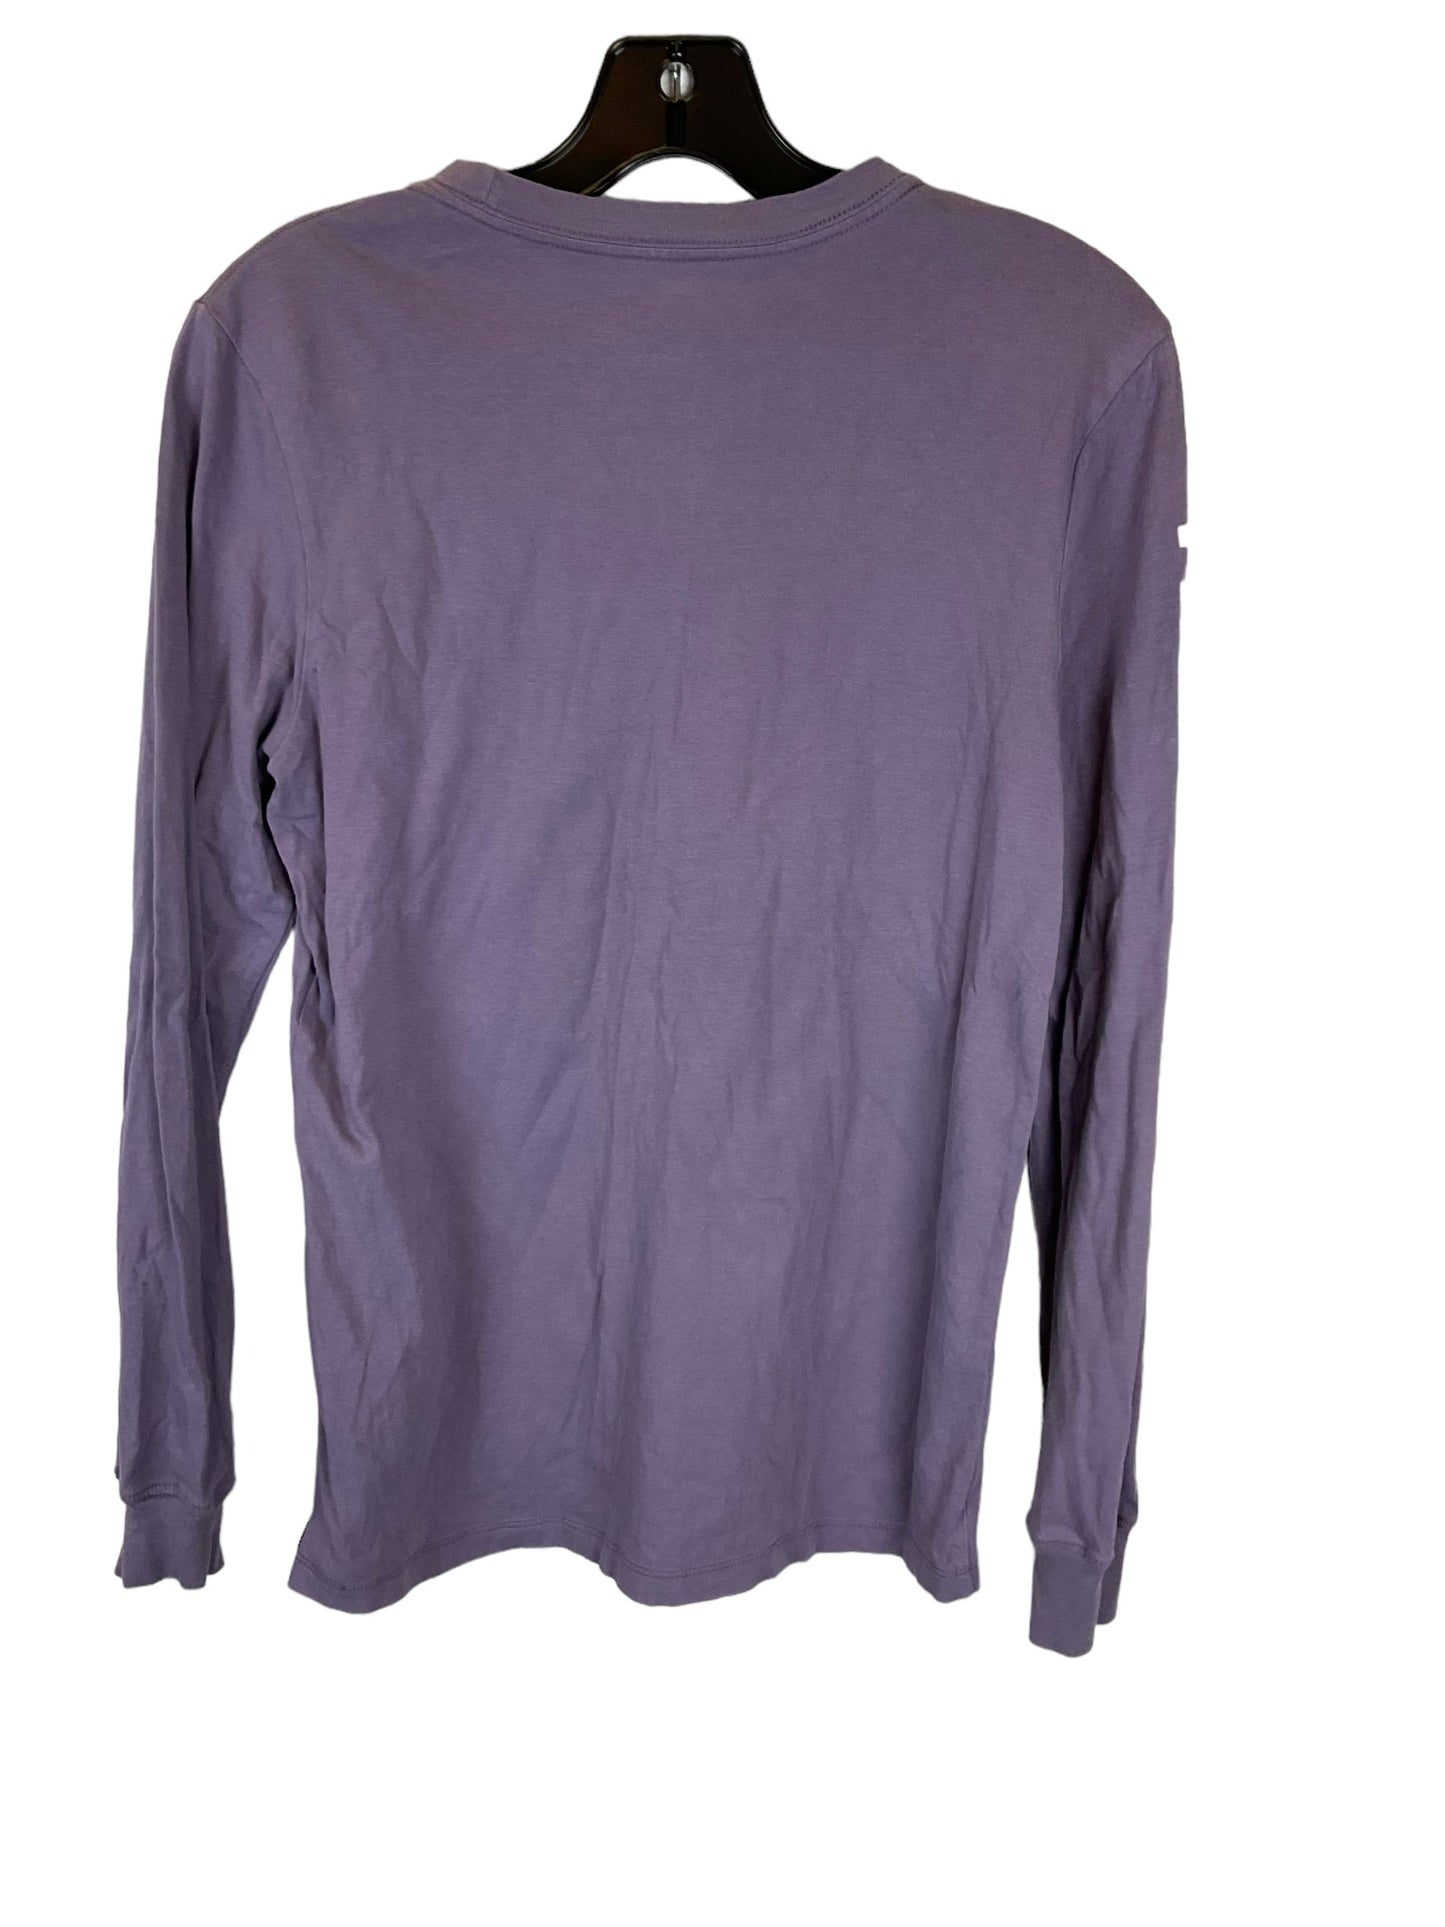 Top Long Sleeve Designer By North Face  Size: Xs